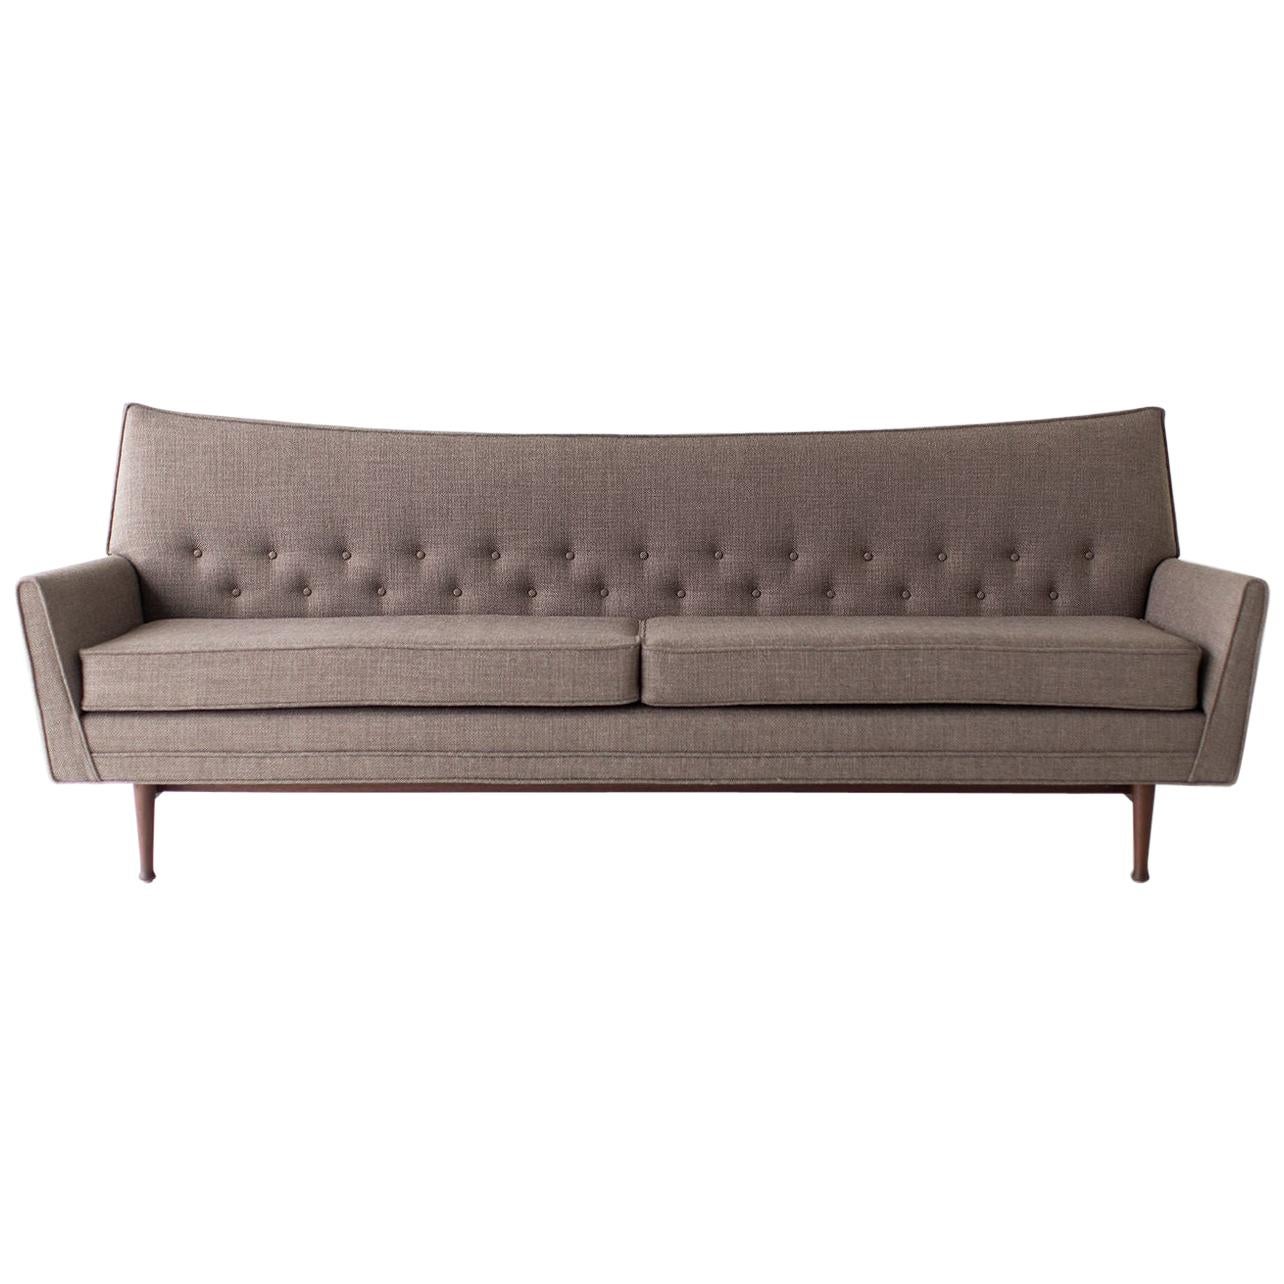 Lawrence Peabody Modern Sofa for Craft Associates Furniture For Sale